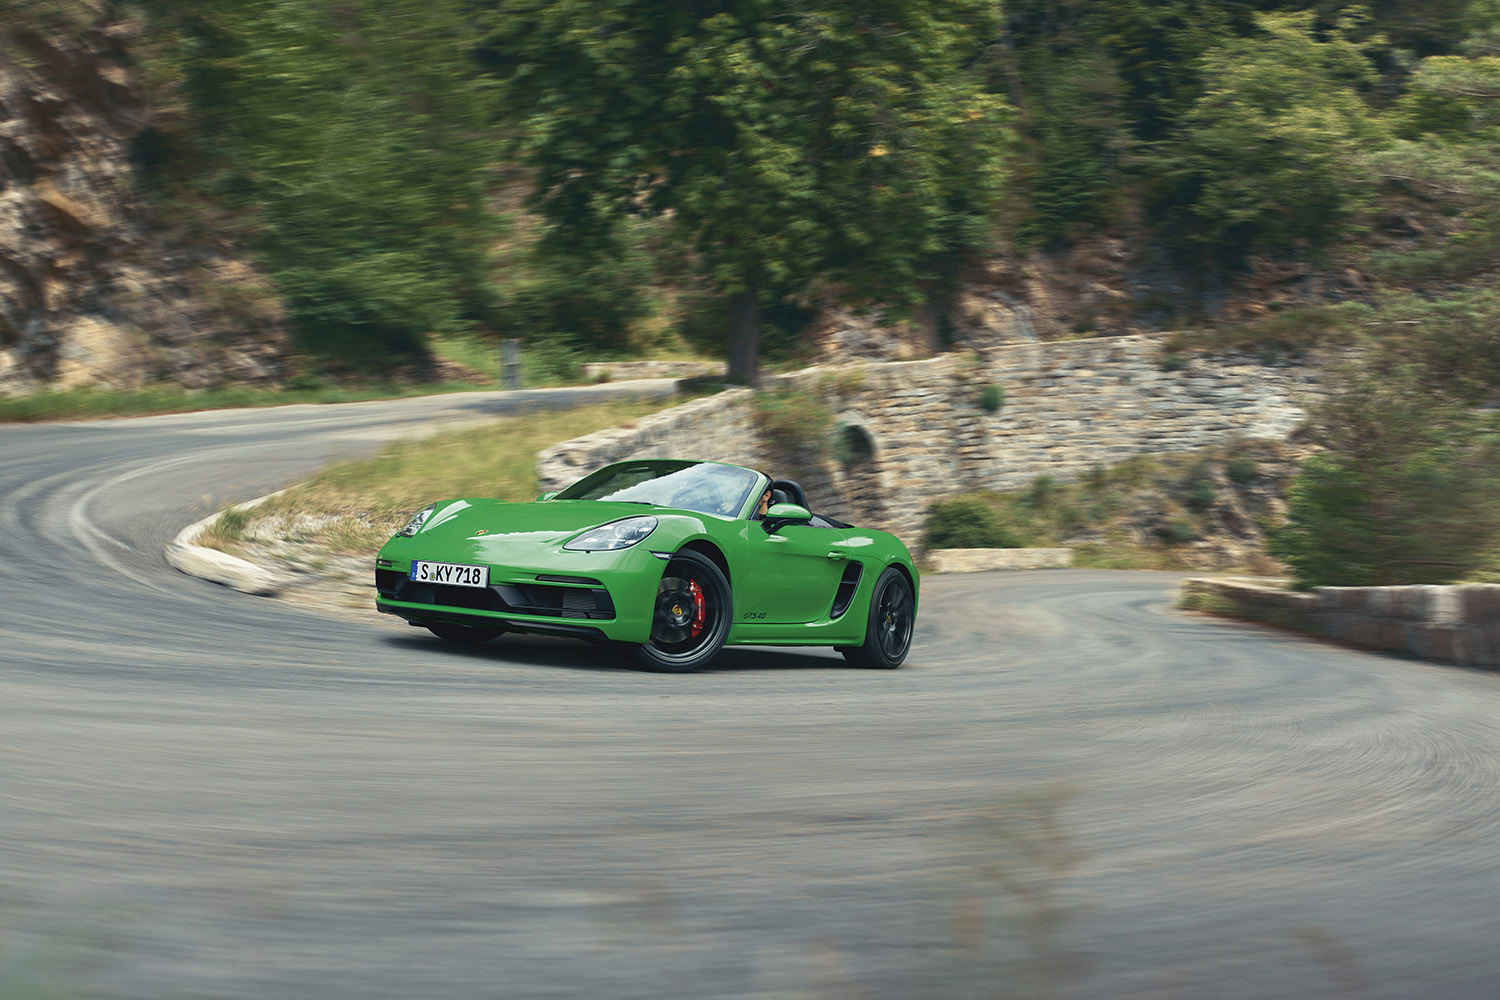 Porsche 718 Boxster GTS 4.0 in green about to reach the apex of a sharp bend along a serpentine alpine road